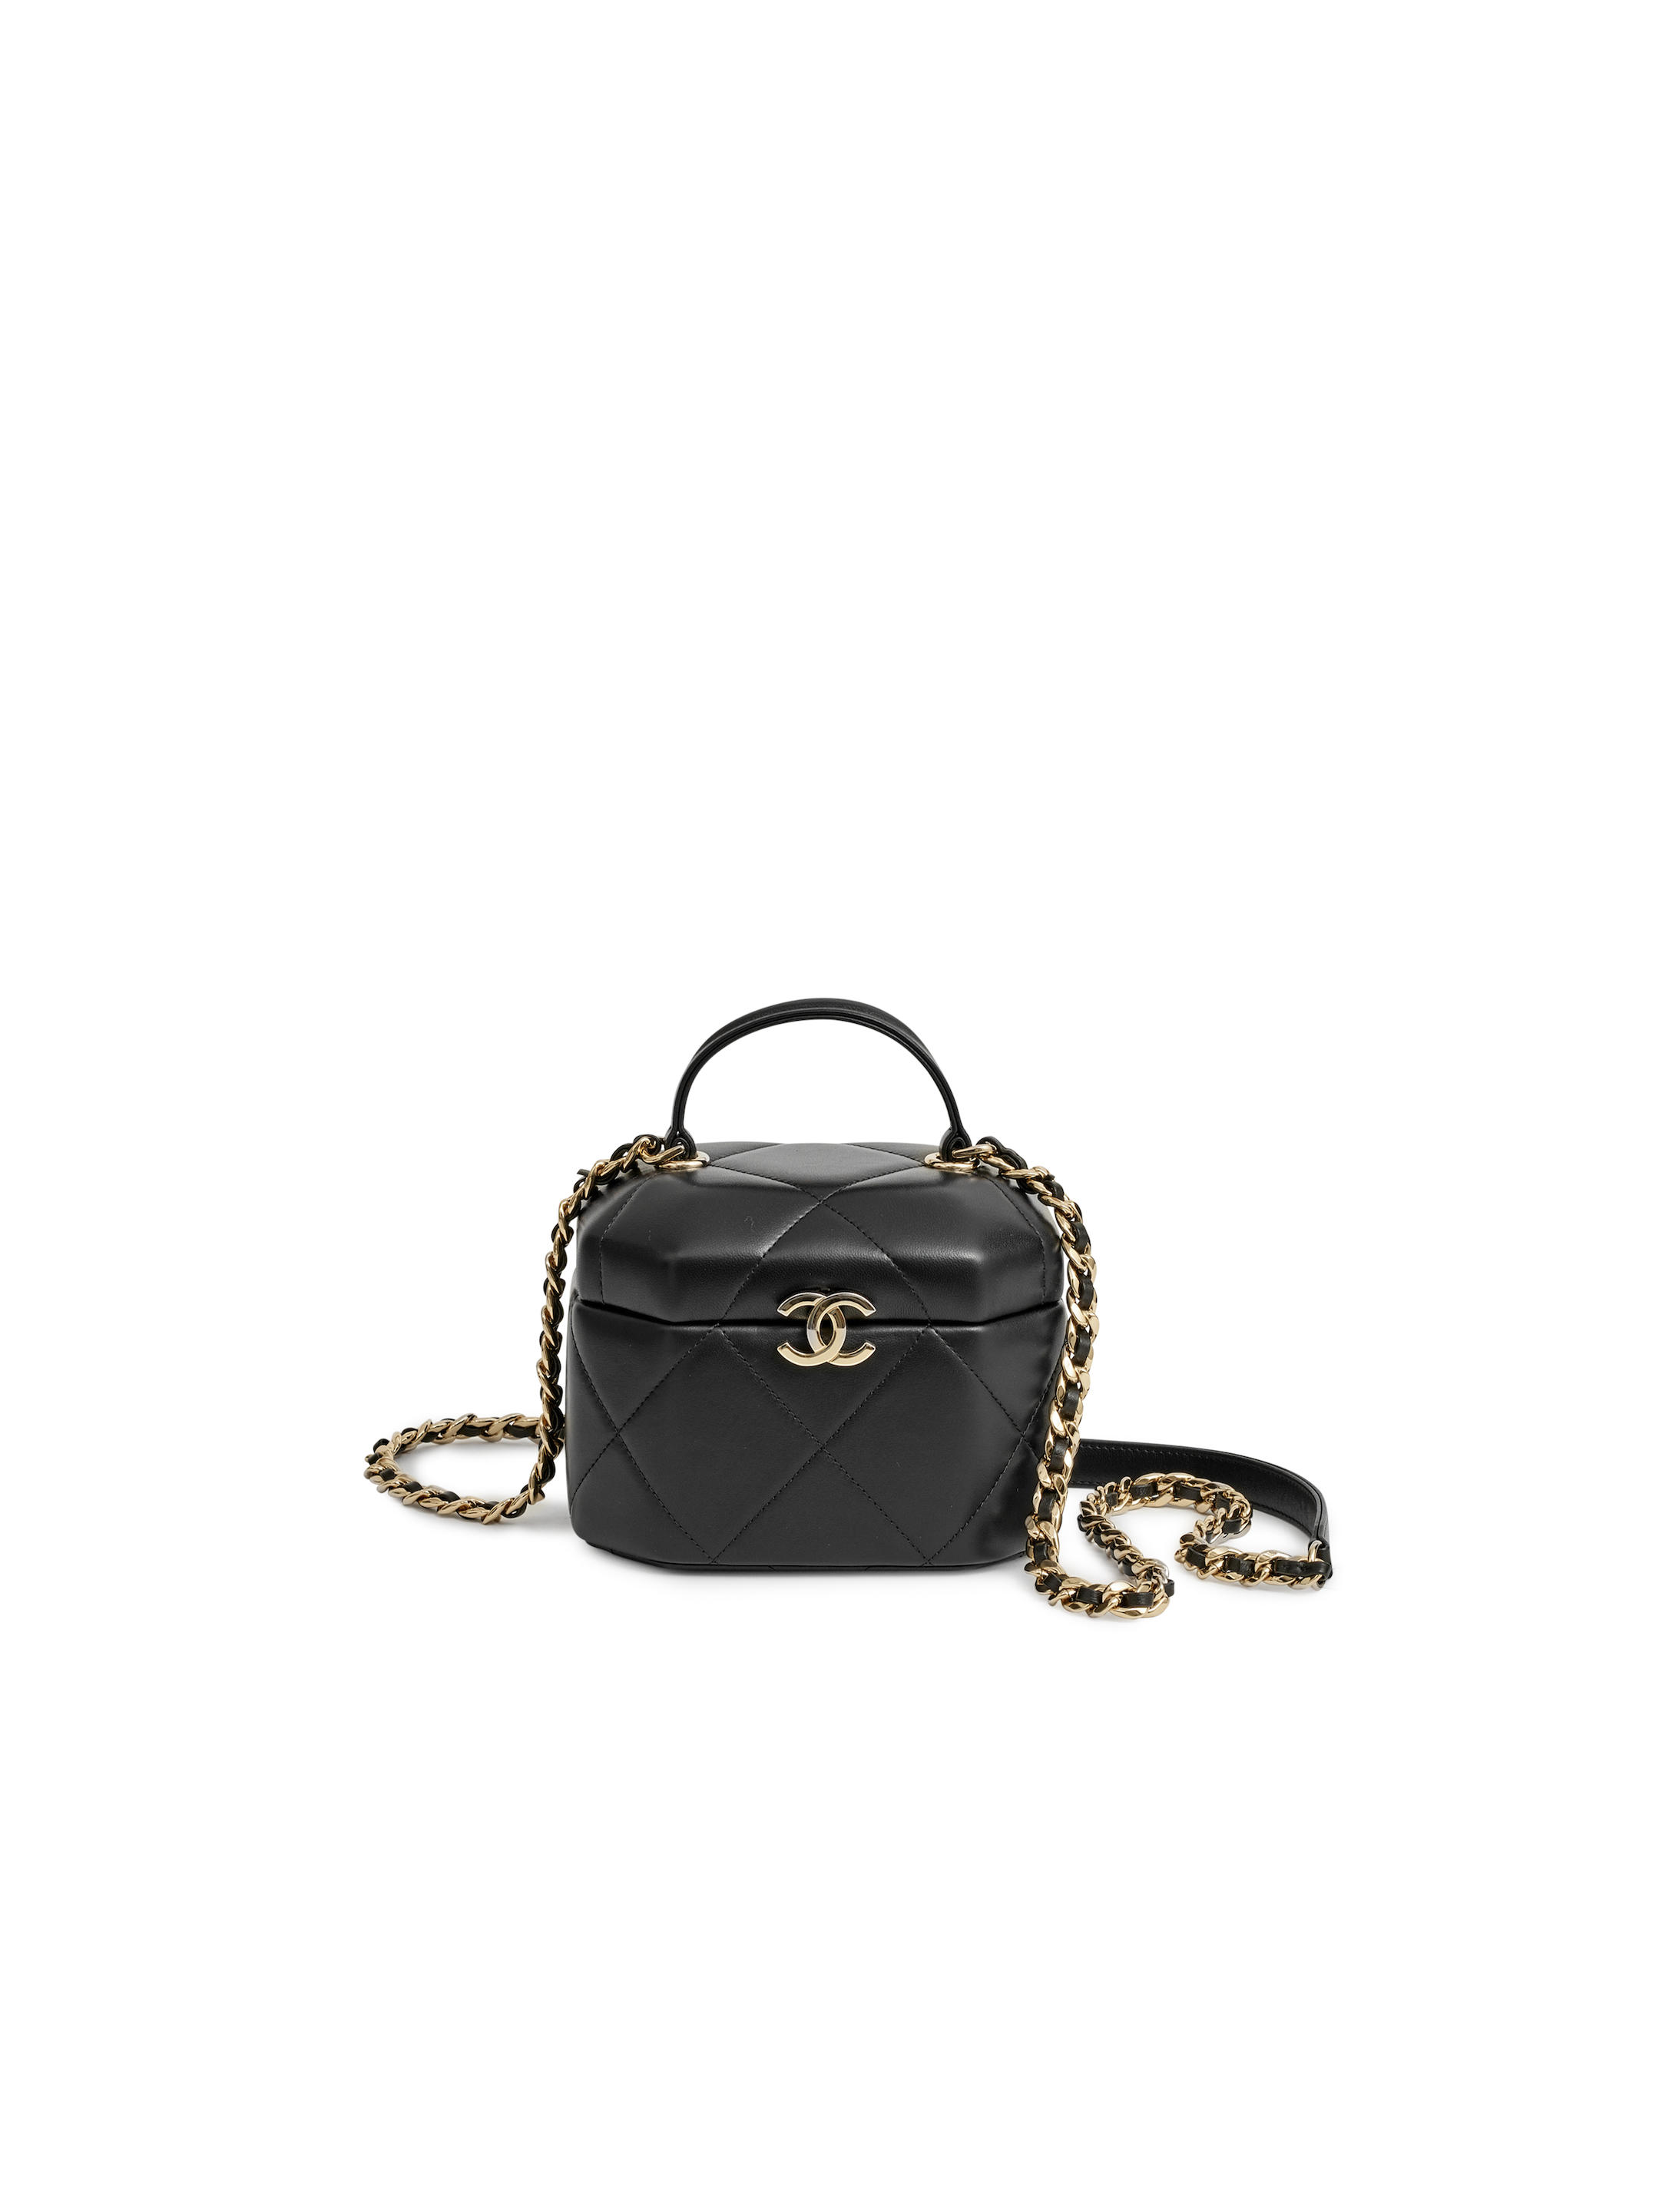 Chanel Small Black Quilted Lambskin Vanity Case